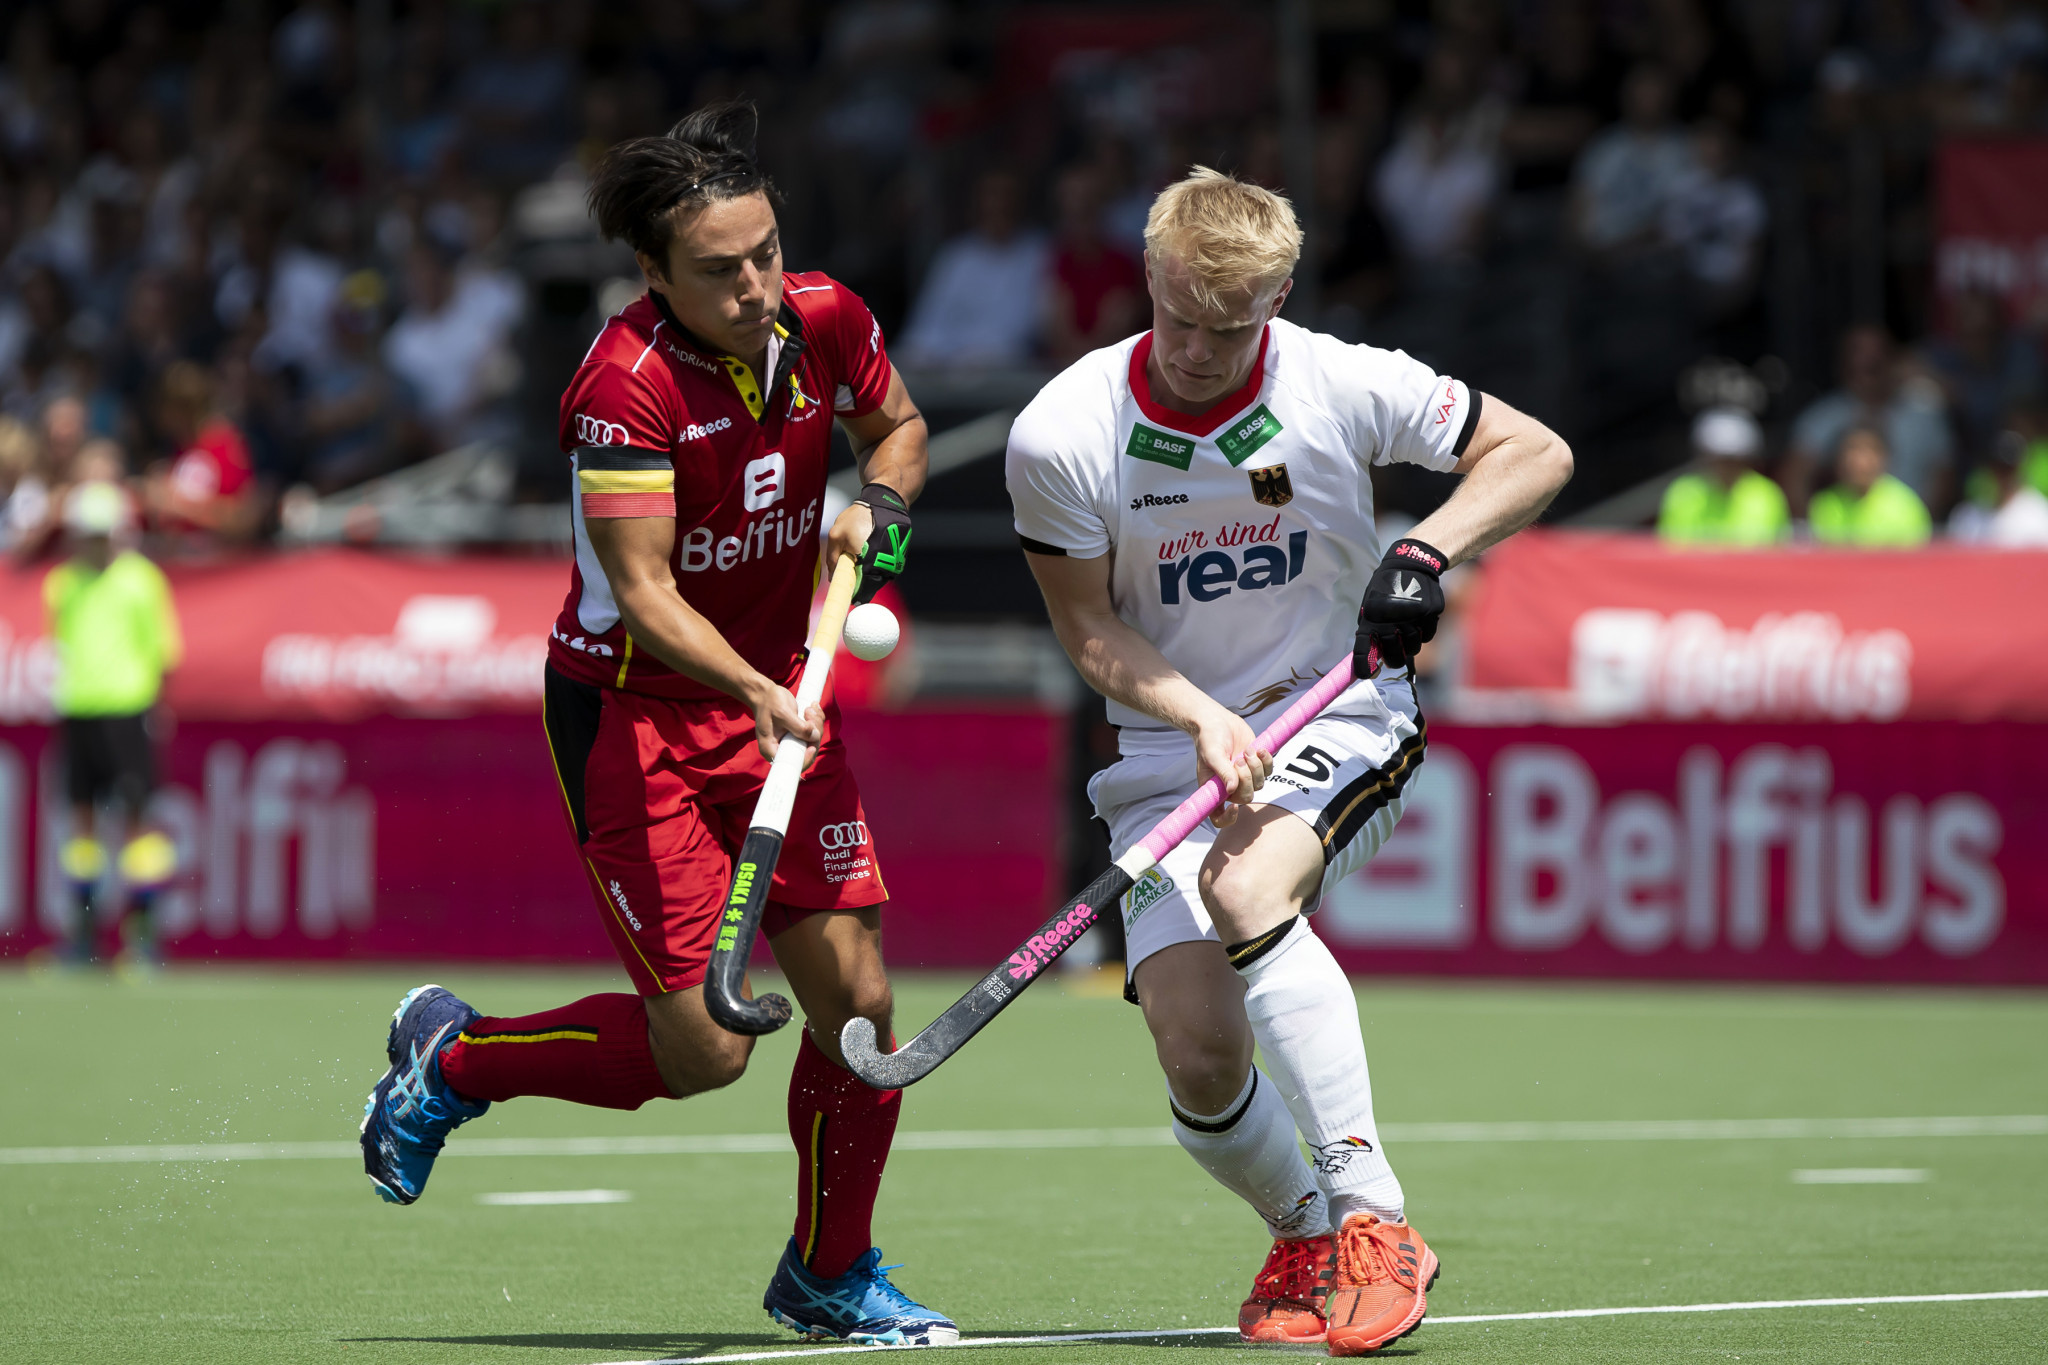 Germany moved into the top four of the men's International Hockey Federation Pro League with a 3-1 home win over Spain ©Getty Images